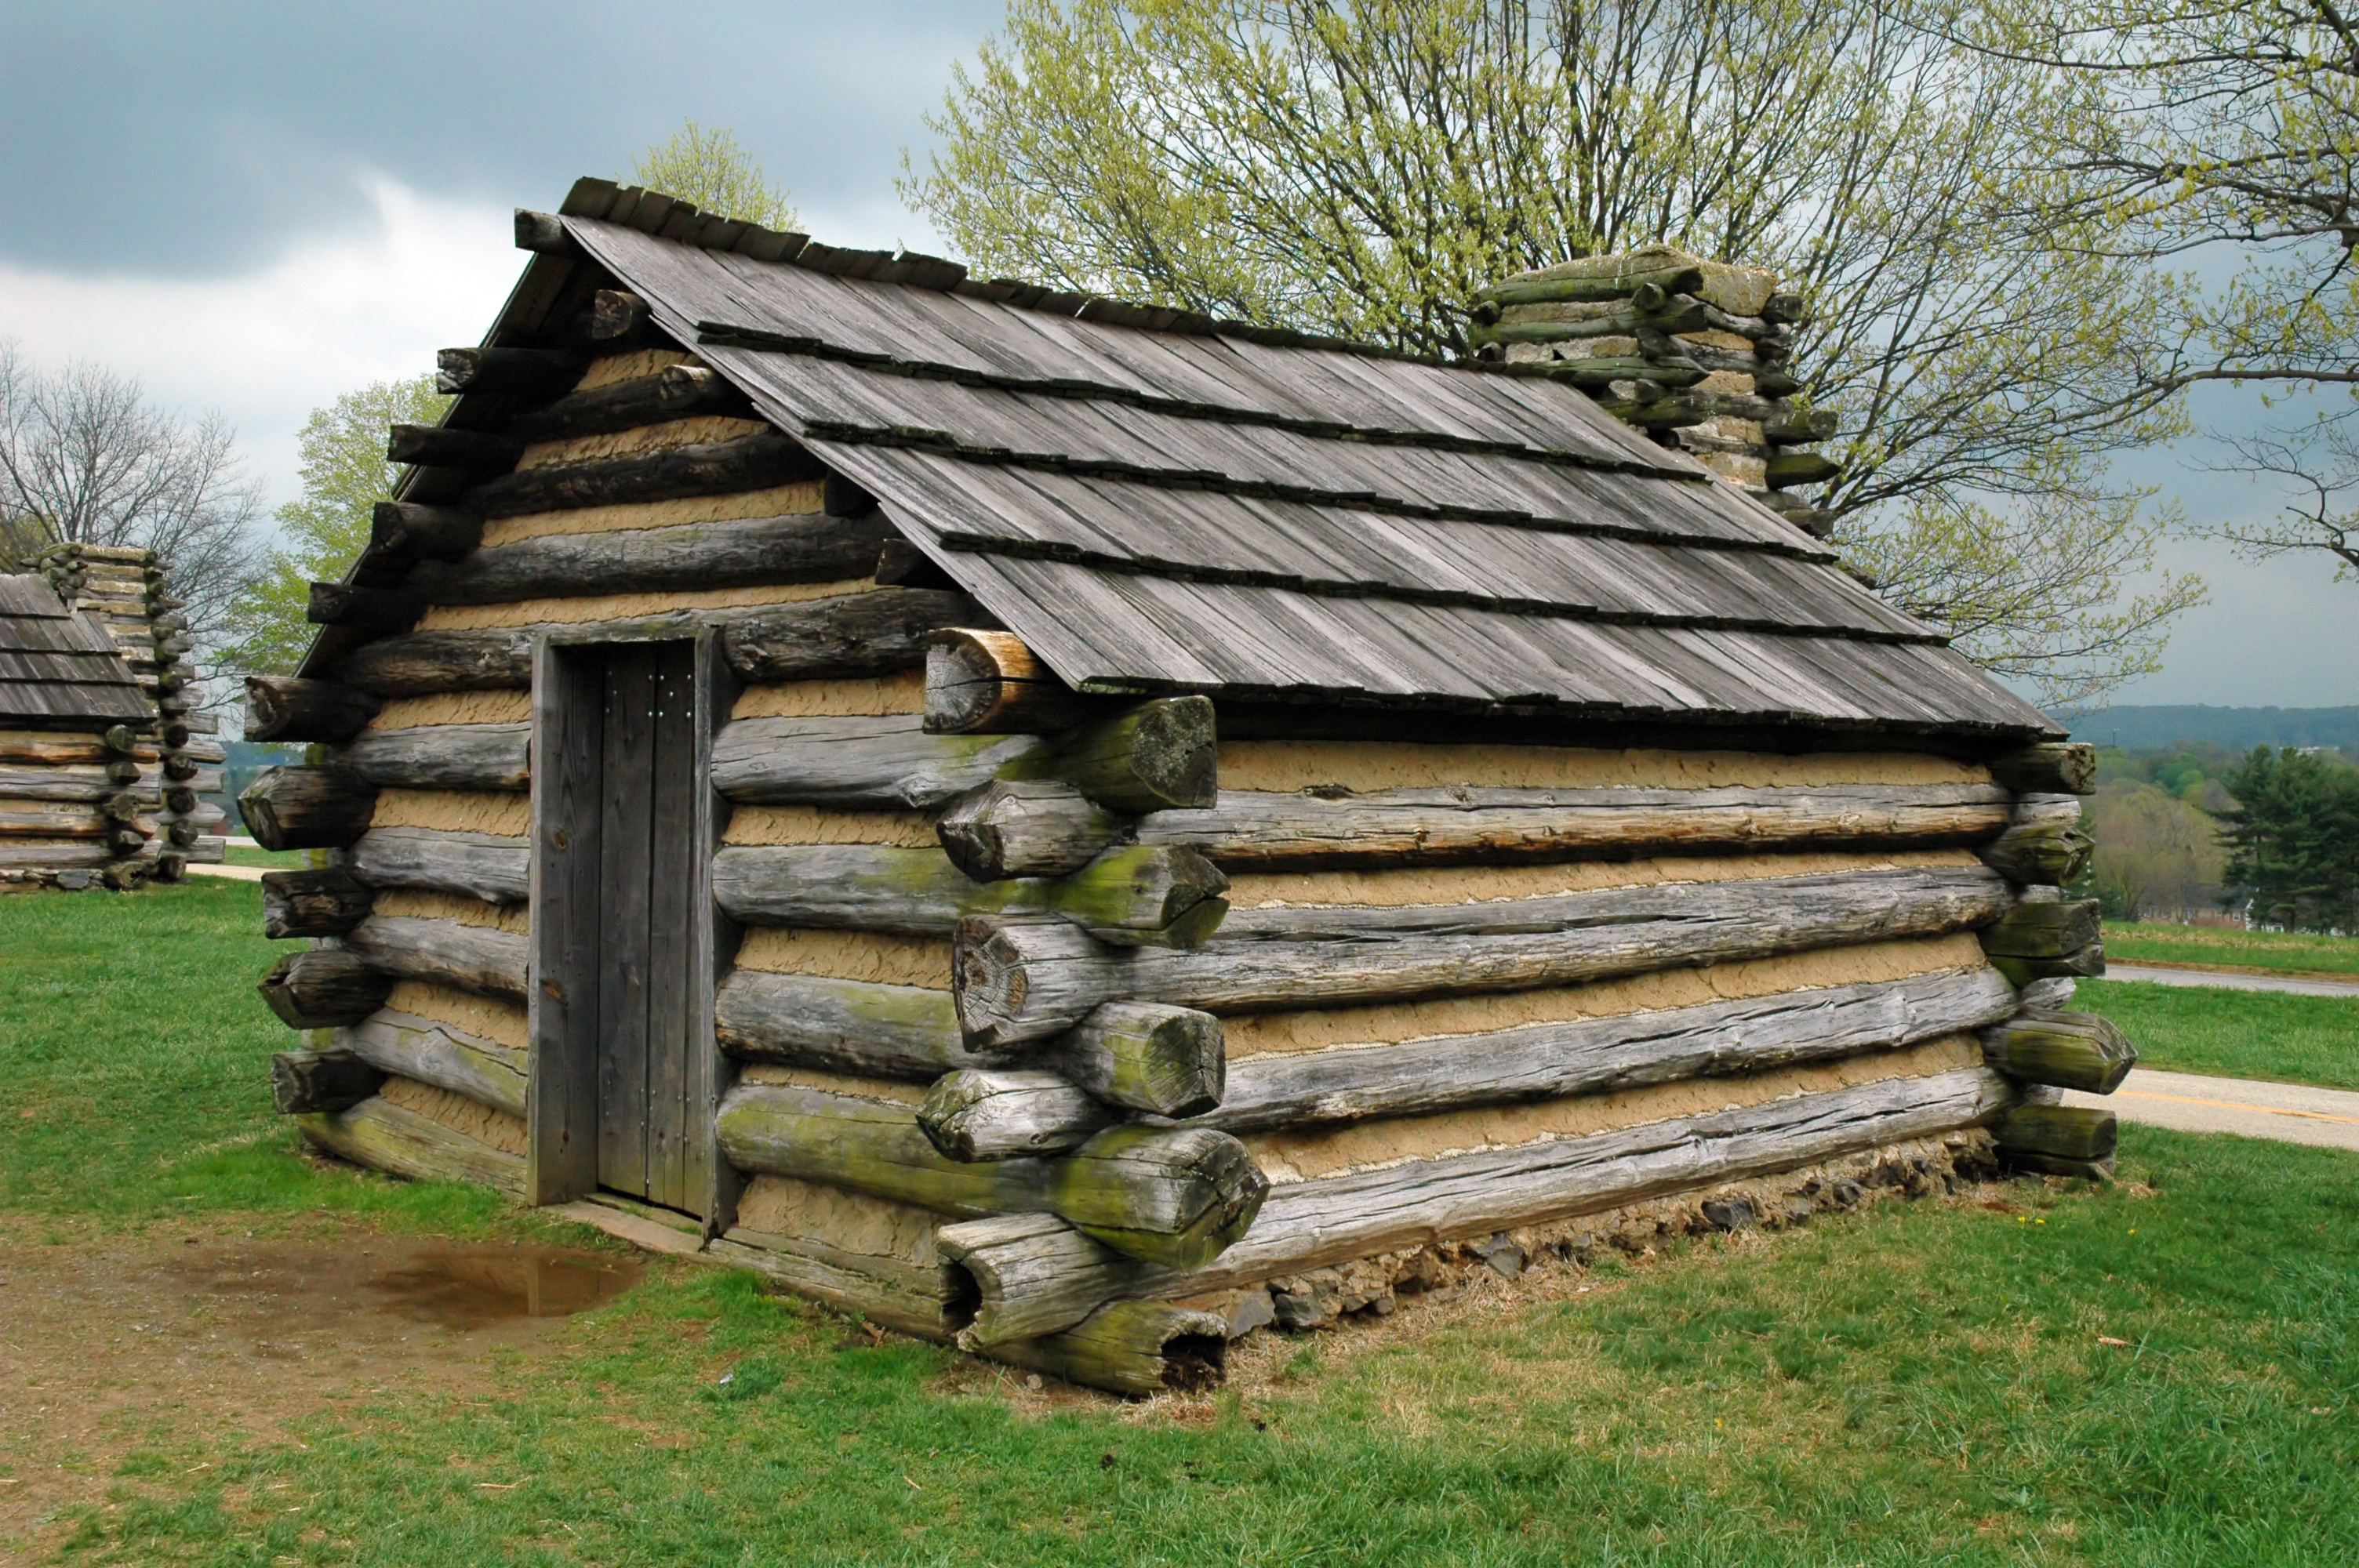 File:Valley Forge cabin.jpg - Wikimedia Commons